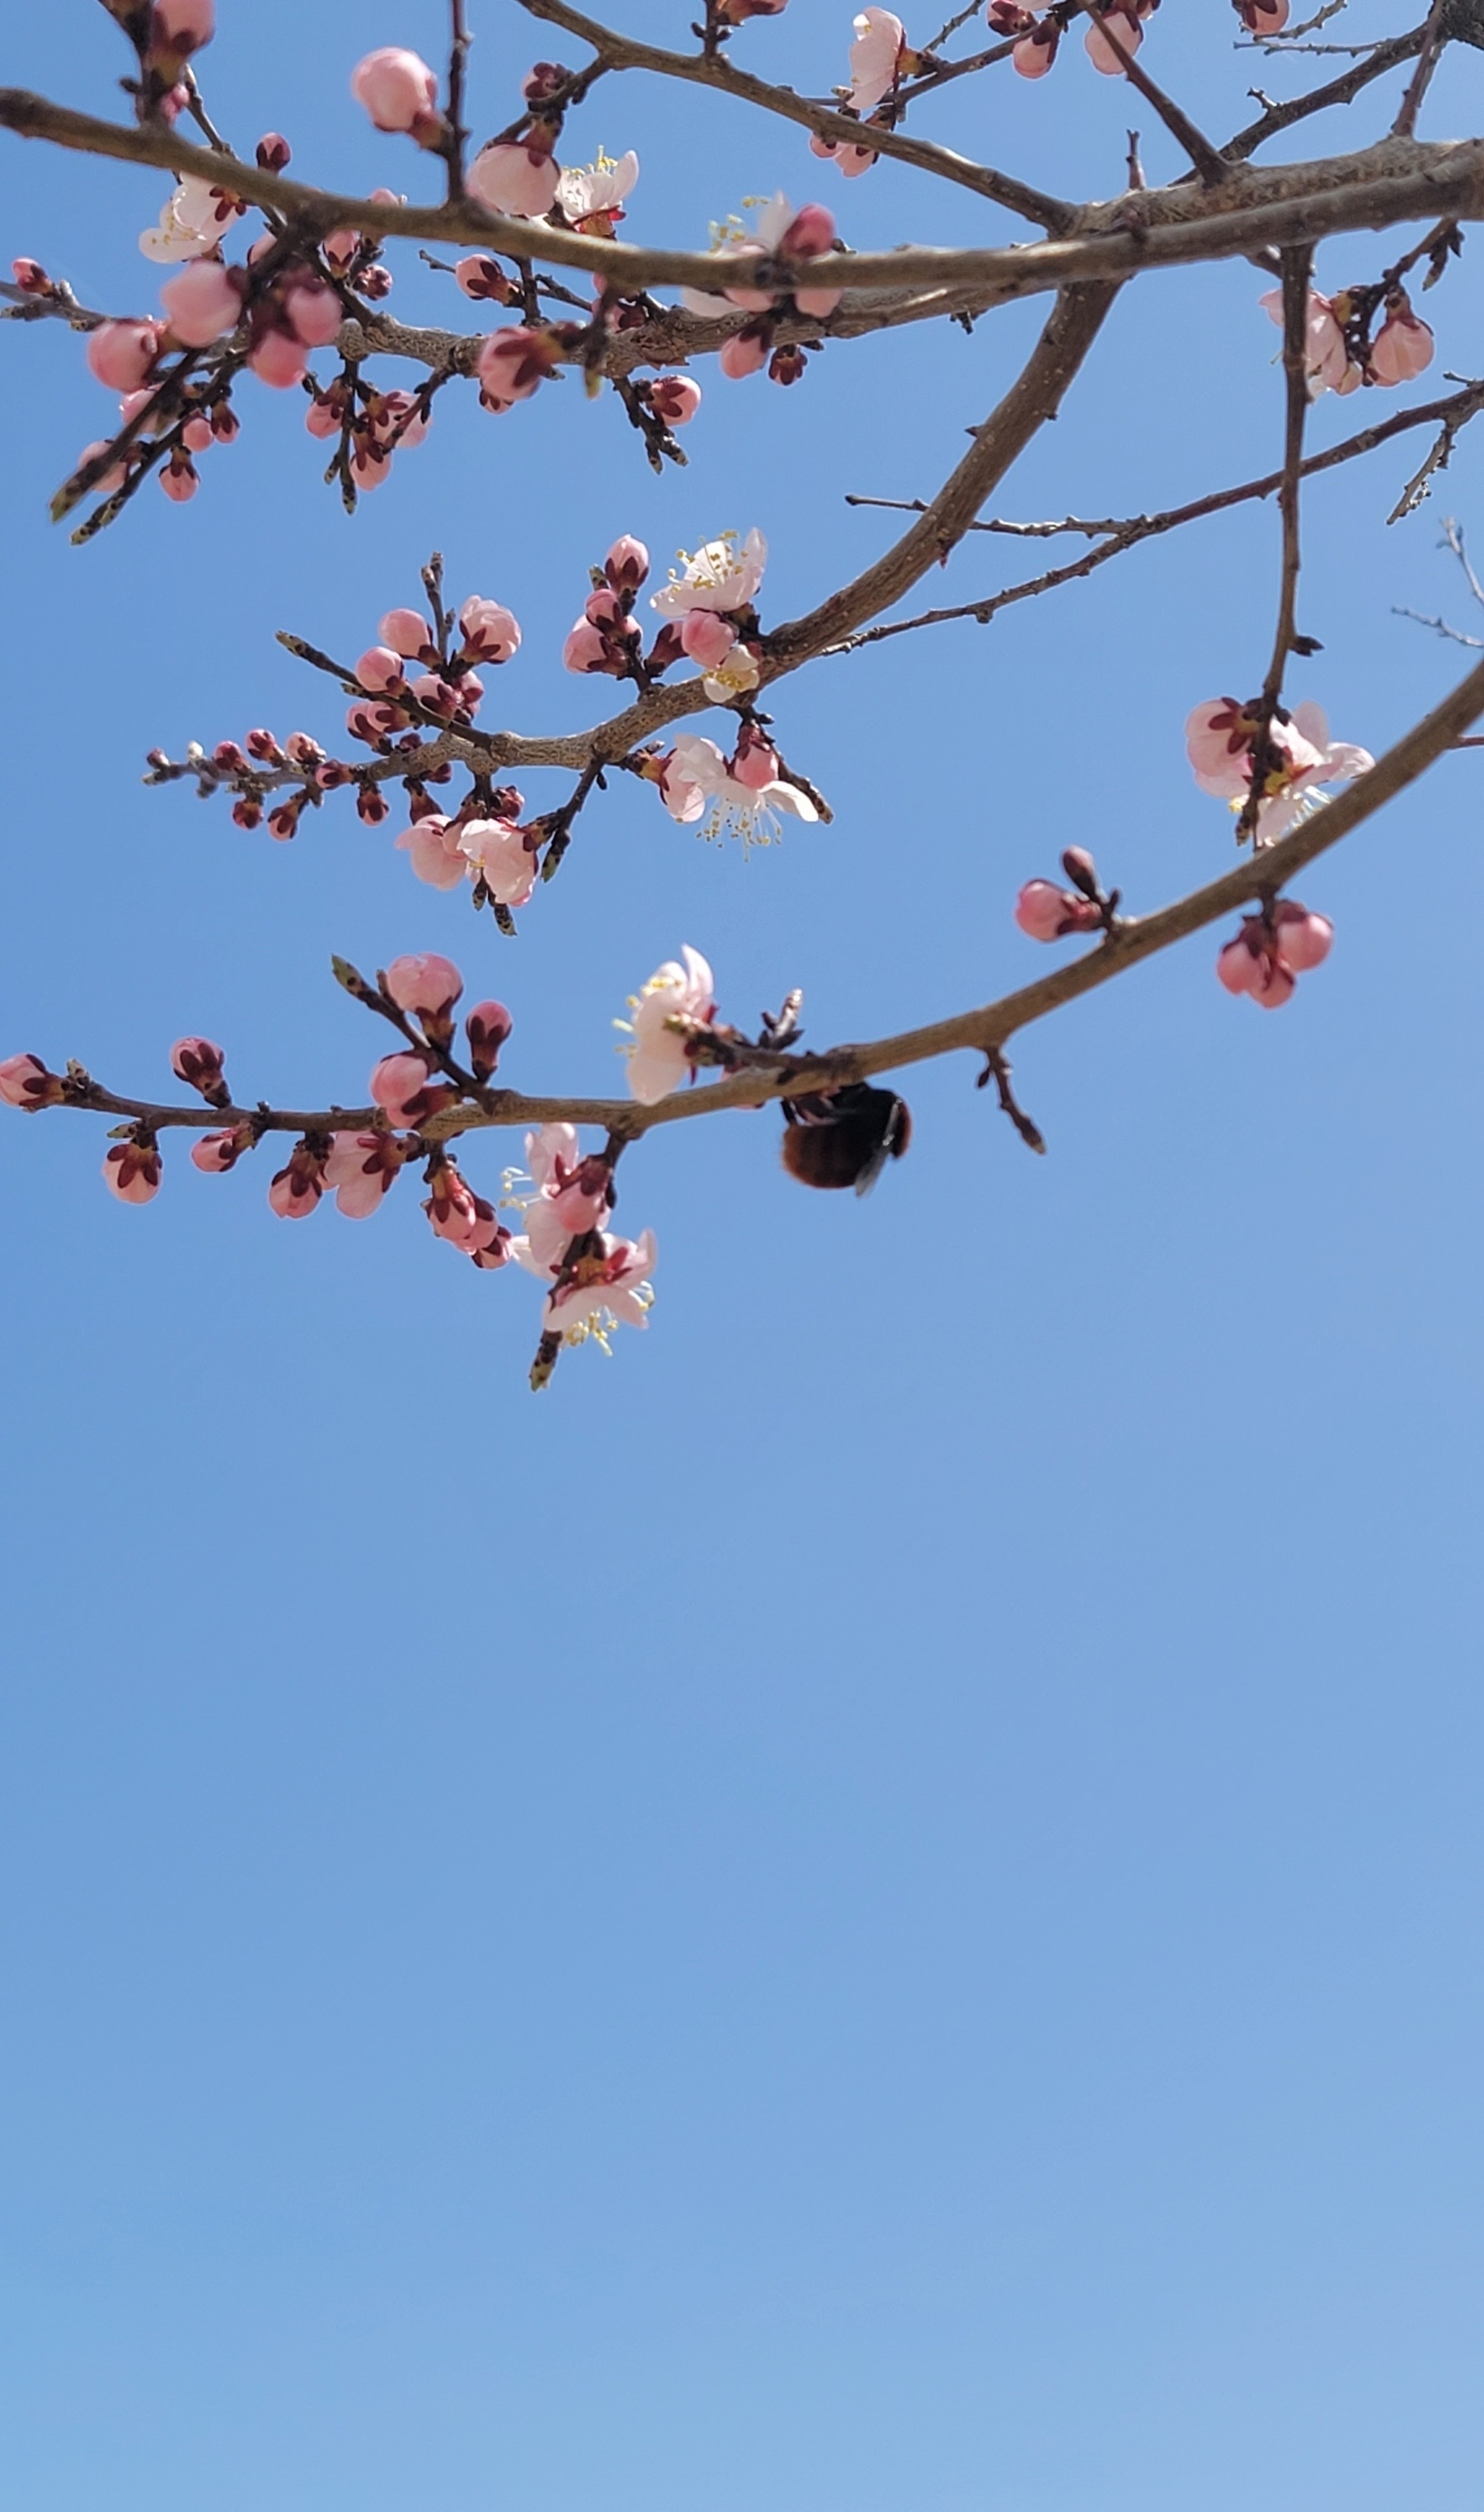 pink blossoms on thin branches in the top half of the picture, over a blue sky